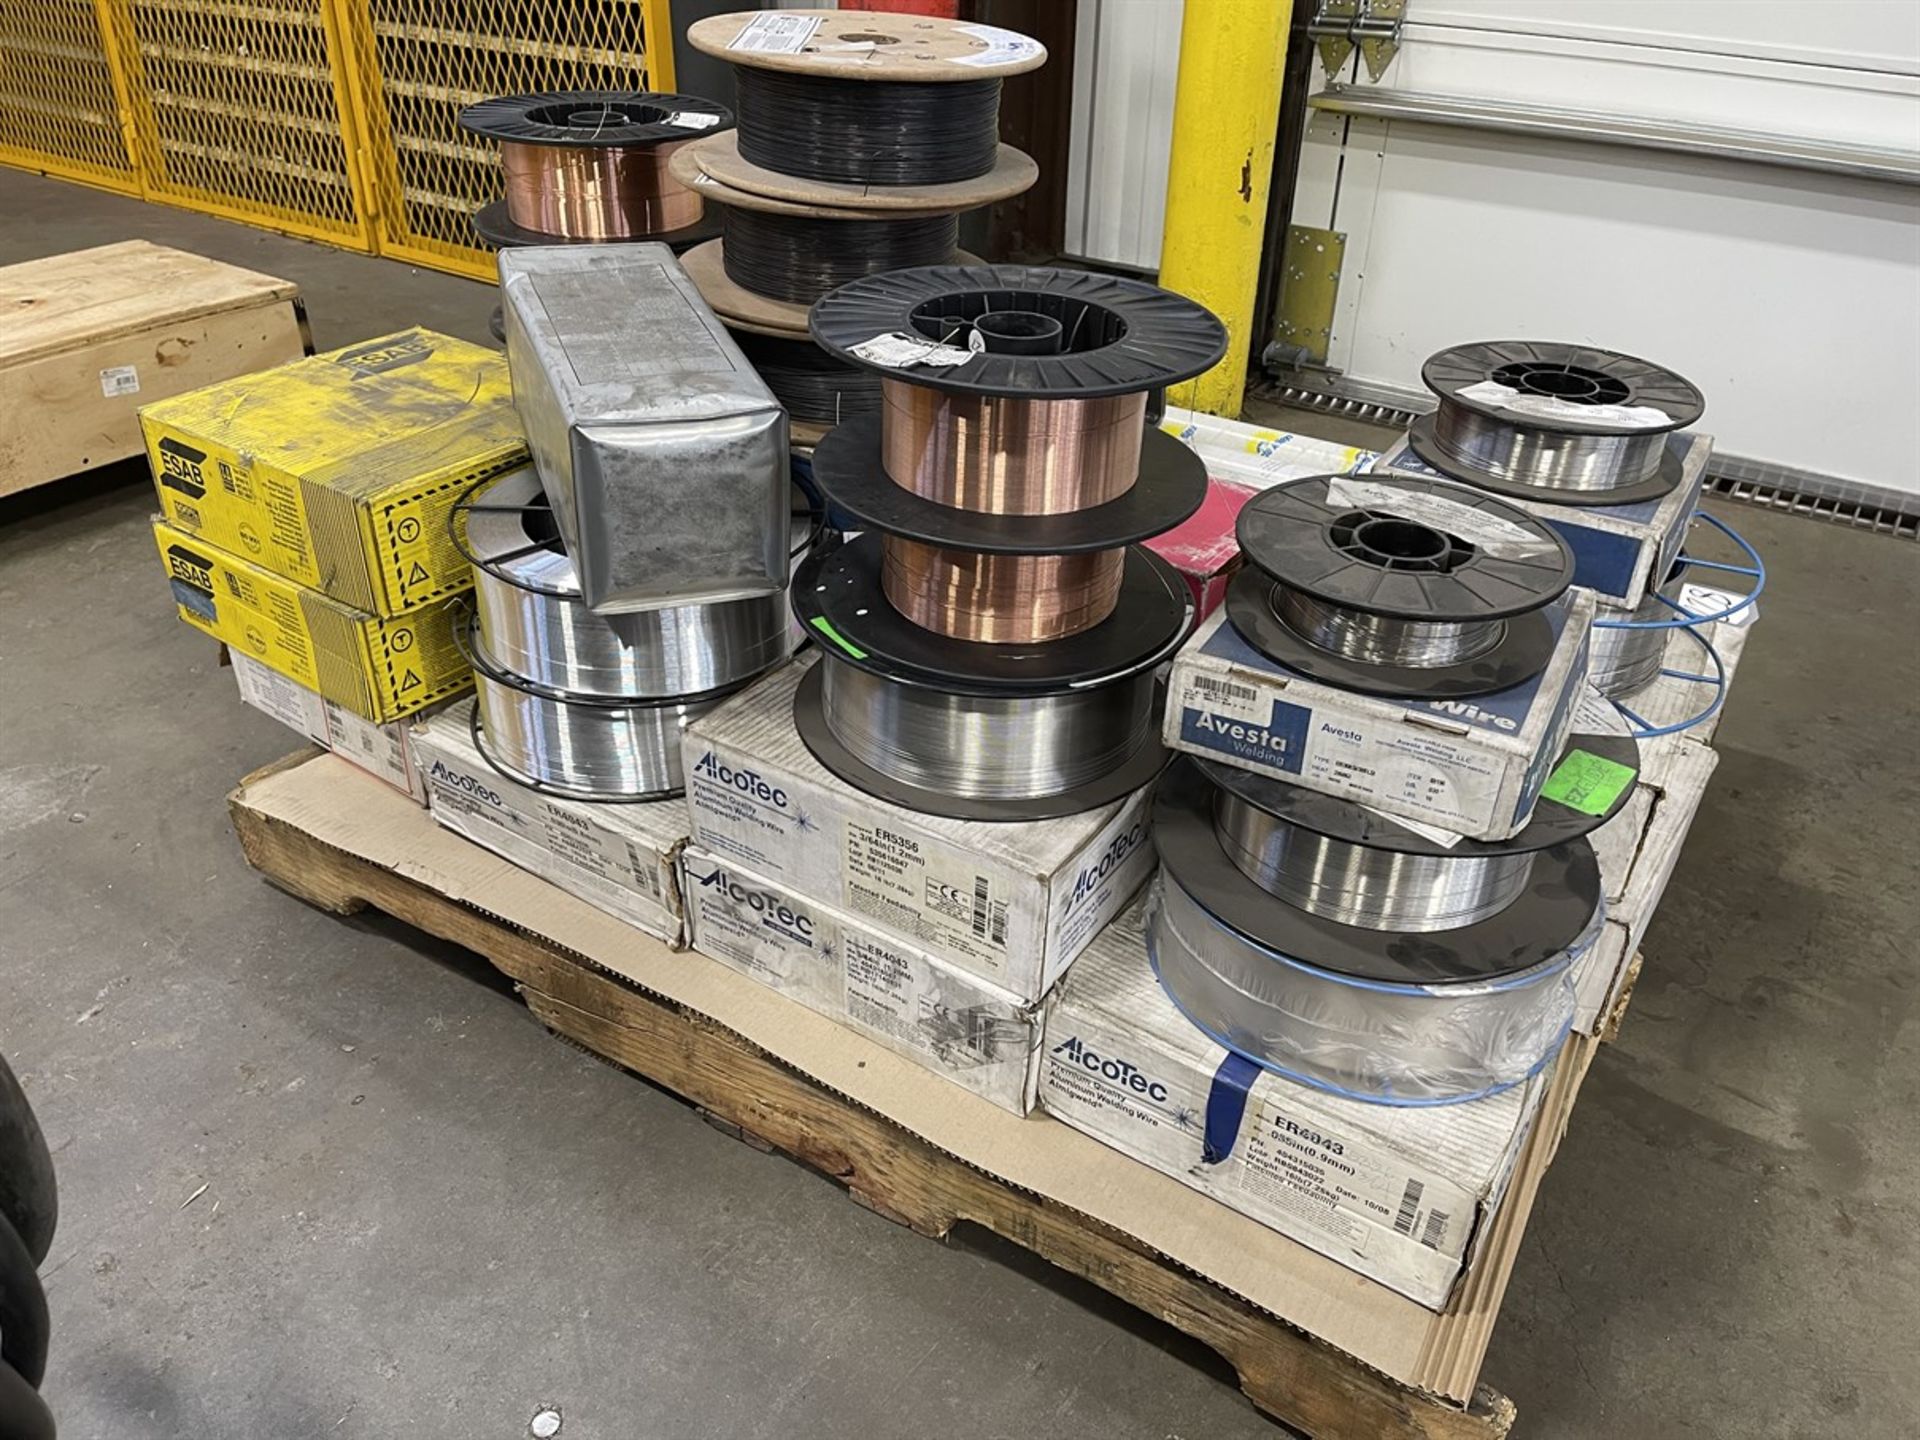 Lot of Assorted Welding Wire Spools and TIG Welding Rod Including AlcoTec ER5356, ER4043, Arcos - Image 8 of 8